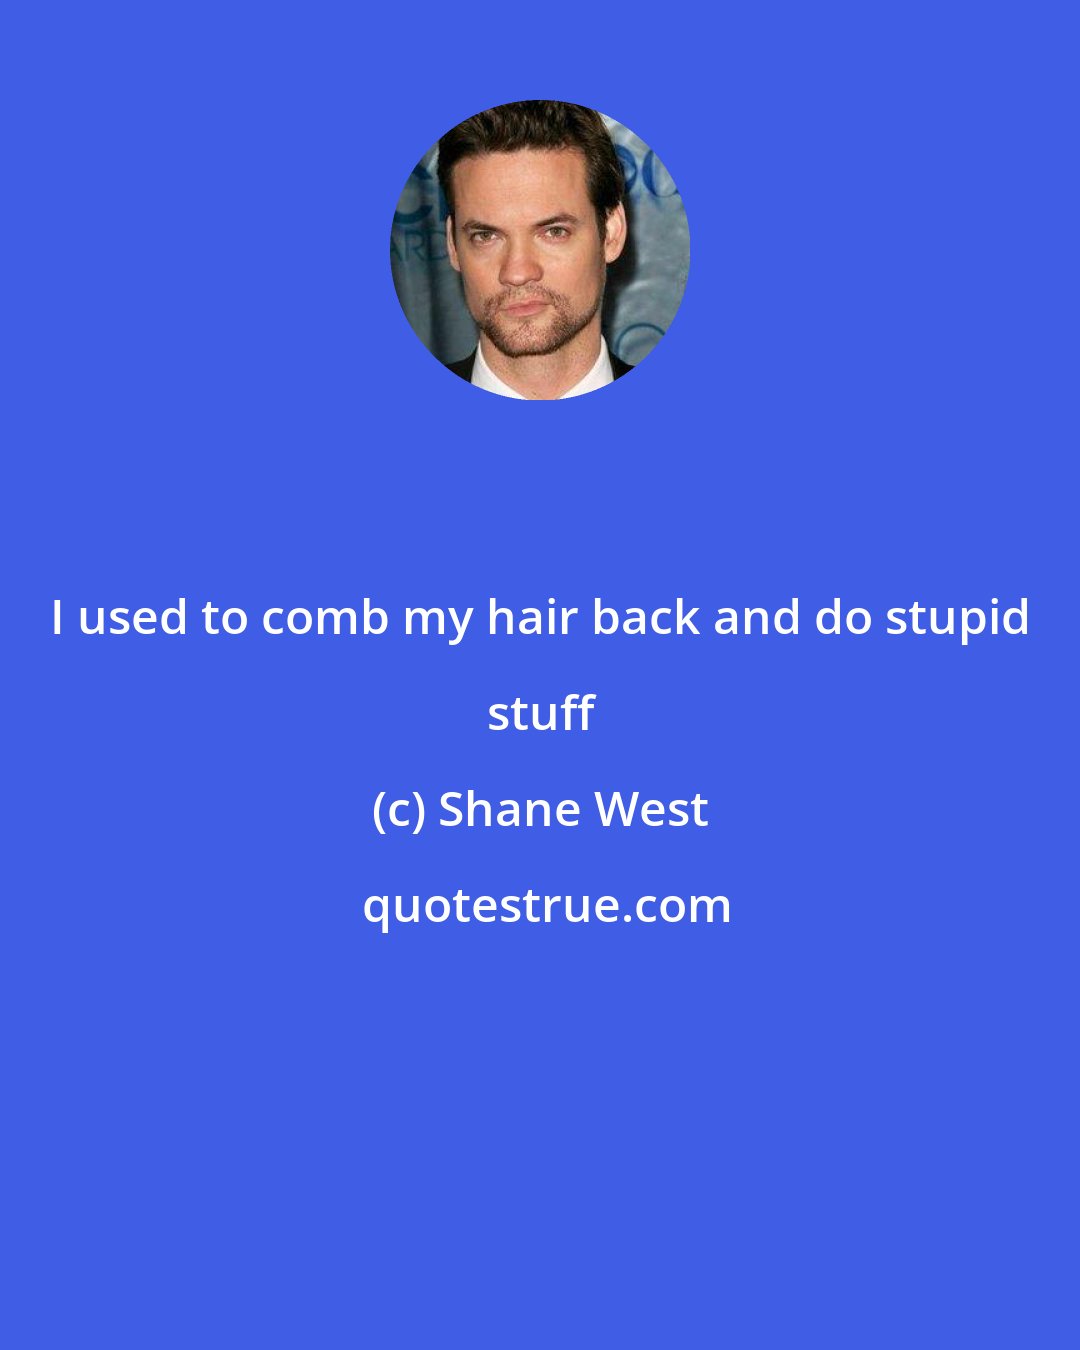 Shane West: I used to comb my hair back and do stupid stuff